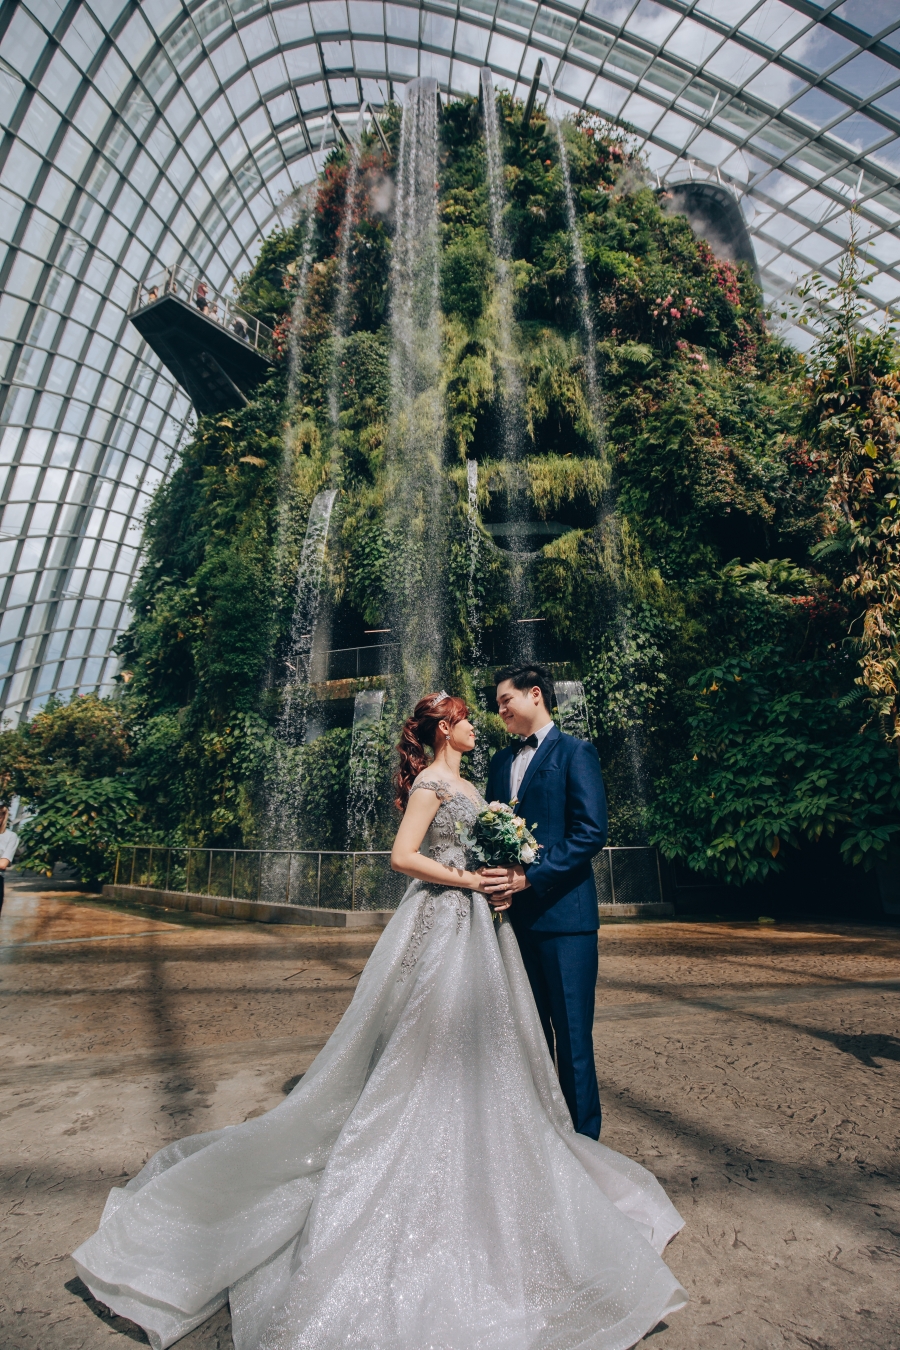 Singapore Pre-Wedding Photoshoot At Gardens By The Bay - Flower Dome, Lower Peirce Reservoir And Night Photoshoot At MBS by Cheng on OneThreeOneFour 0